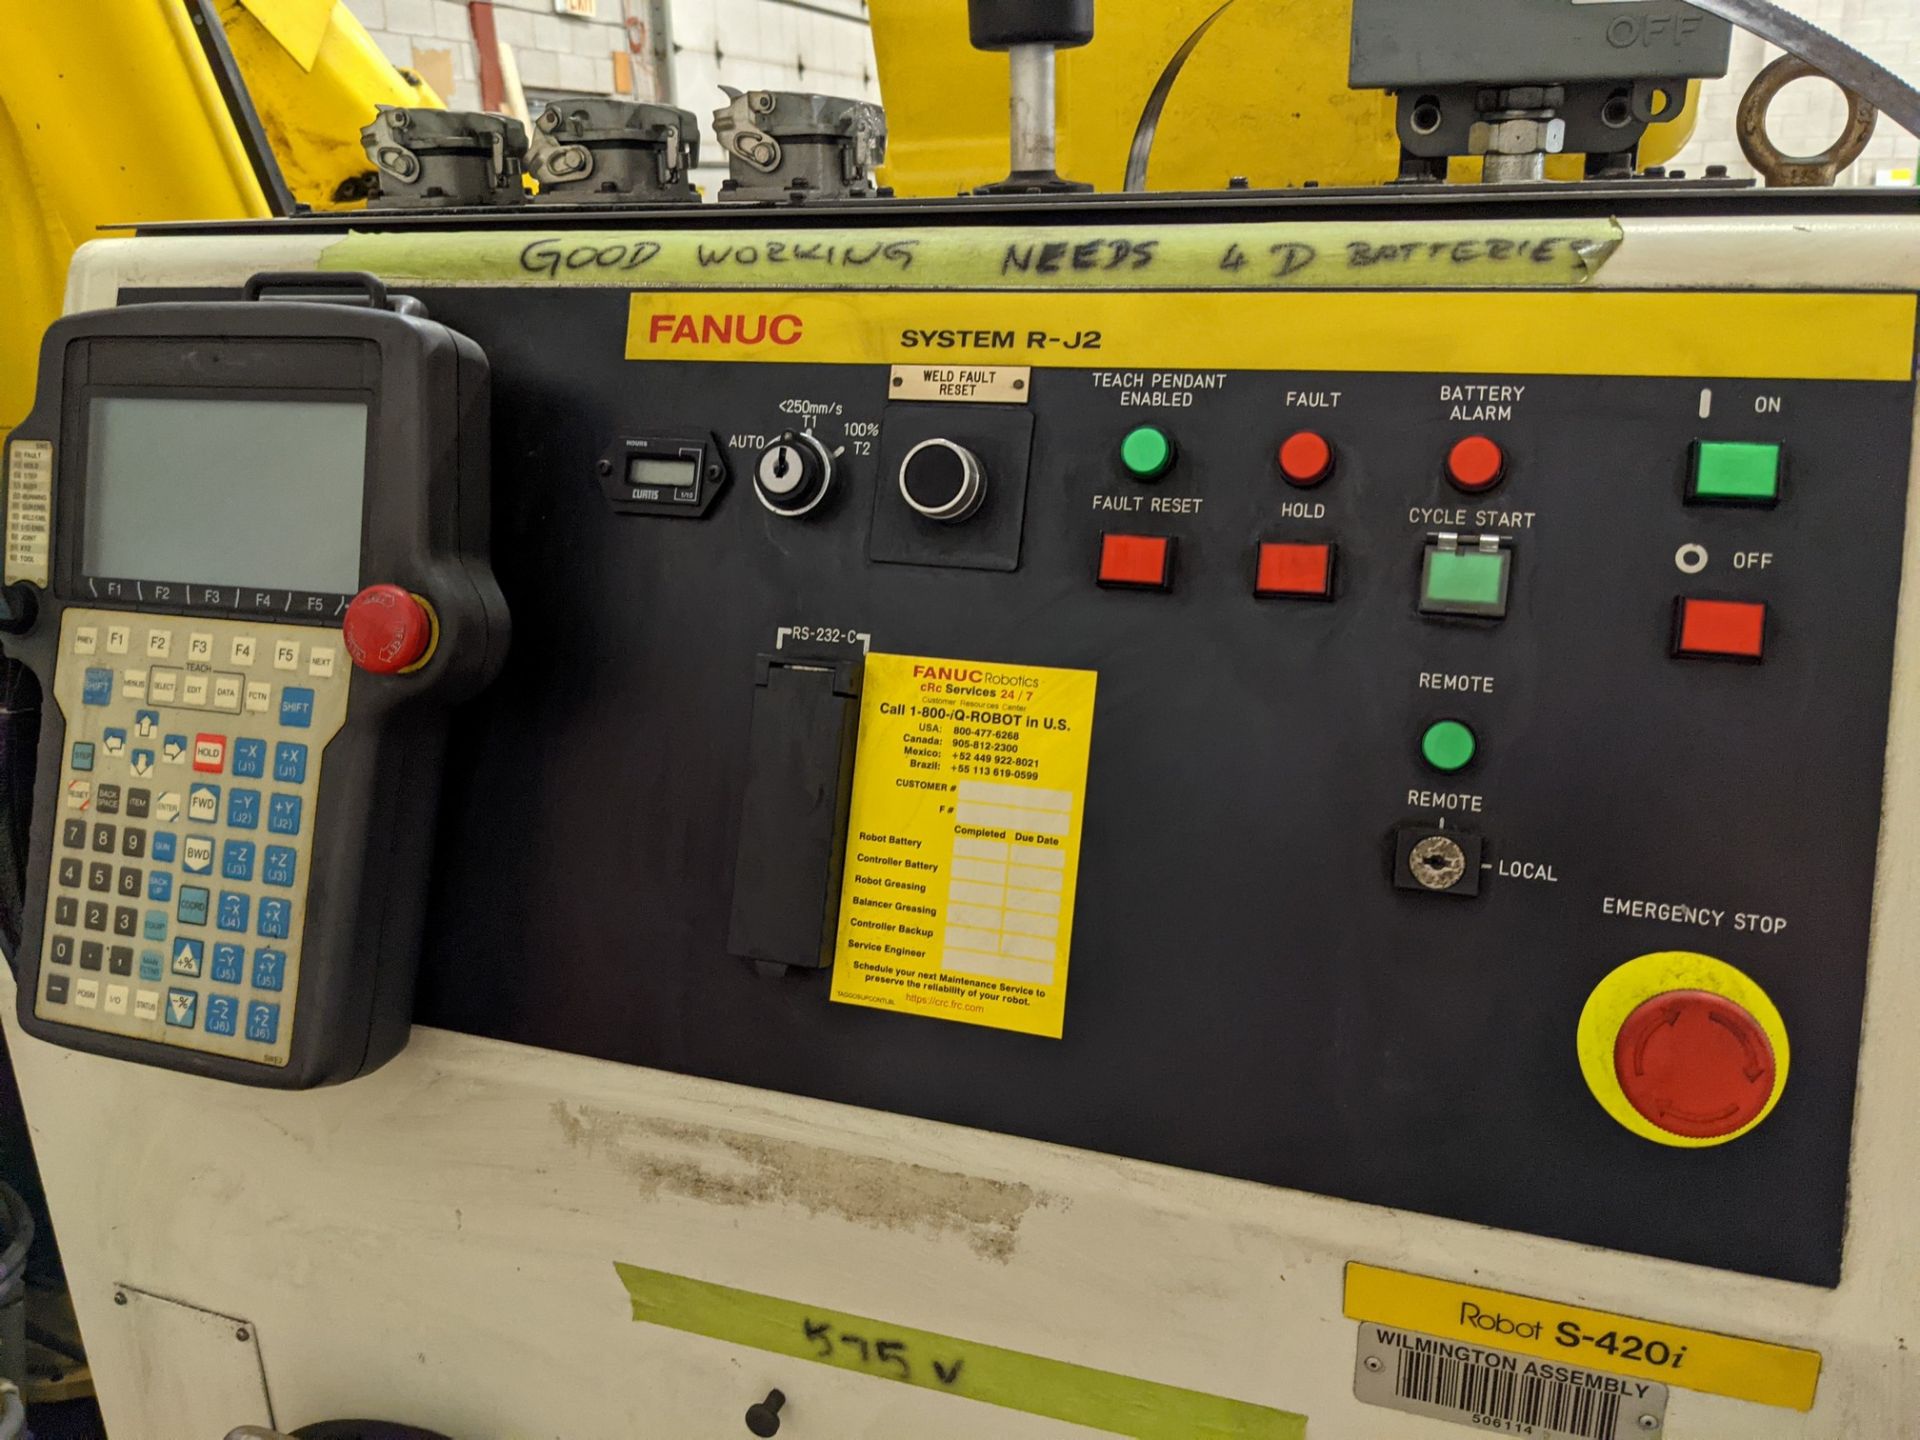 FANUC S-420IW ROBOT W/ FANUC SYSTEM R-J2 S-420I CONTROLLER, TYPE A05B-2351-B008, S/N E97900176 W/ - Image 2 of 7